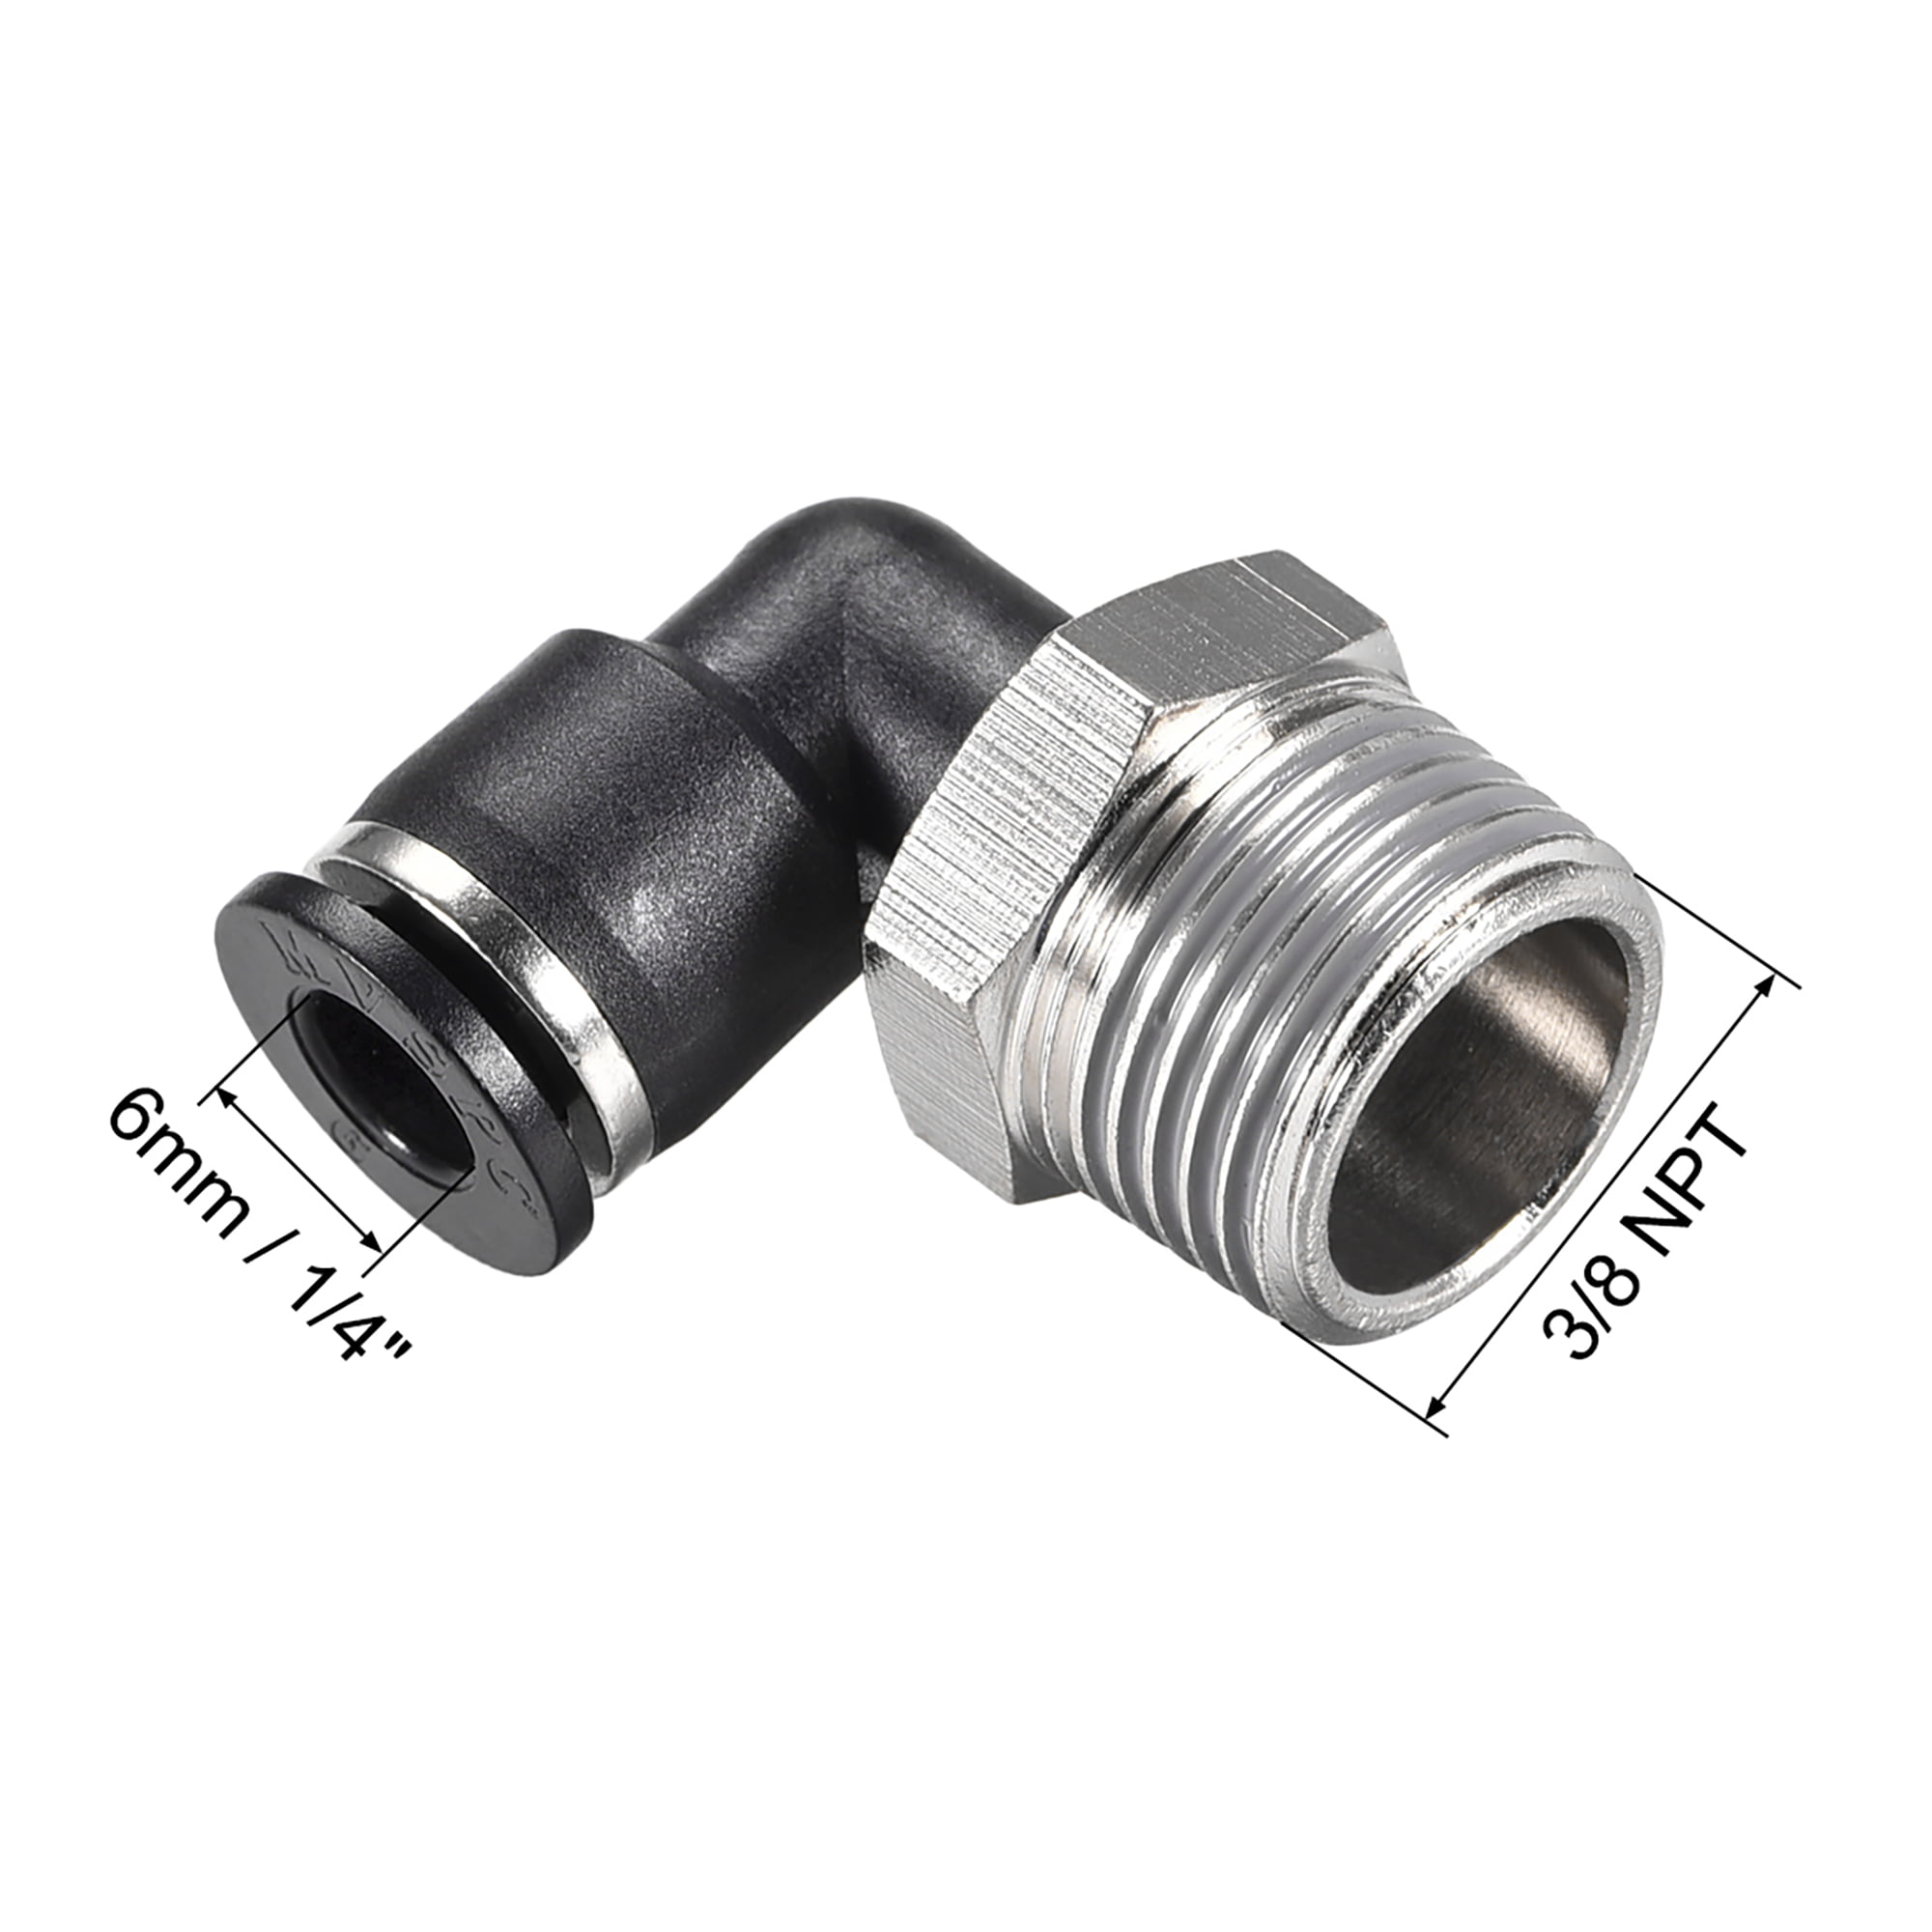 Pneumatic Male Elbow Connector Push In Fitting Tube OD 1/2" X NPT 1/4" 5 Pieces 